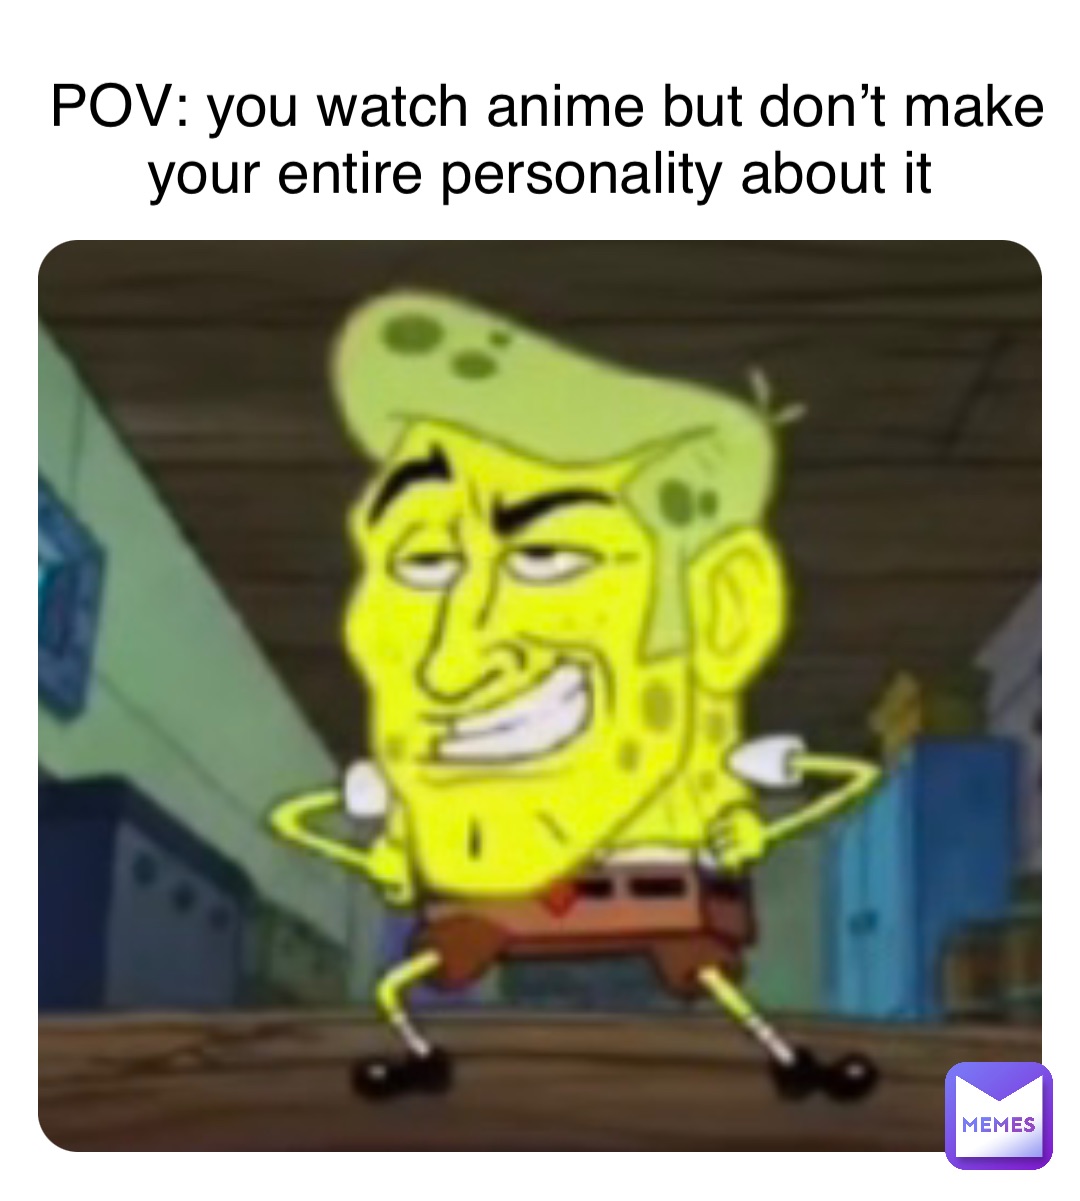 POV: you watch anime but don’t make your entire personality about it